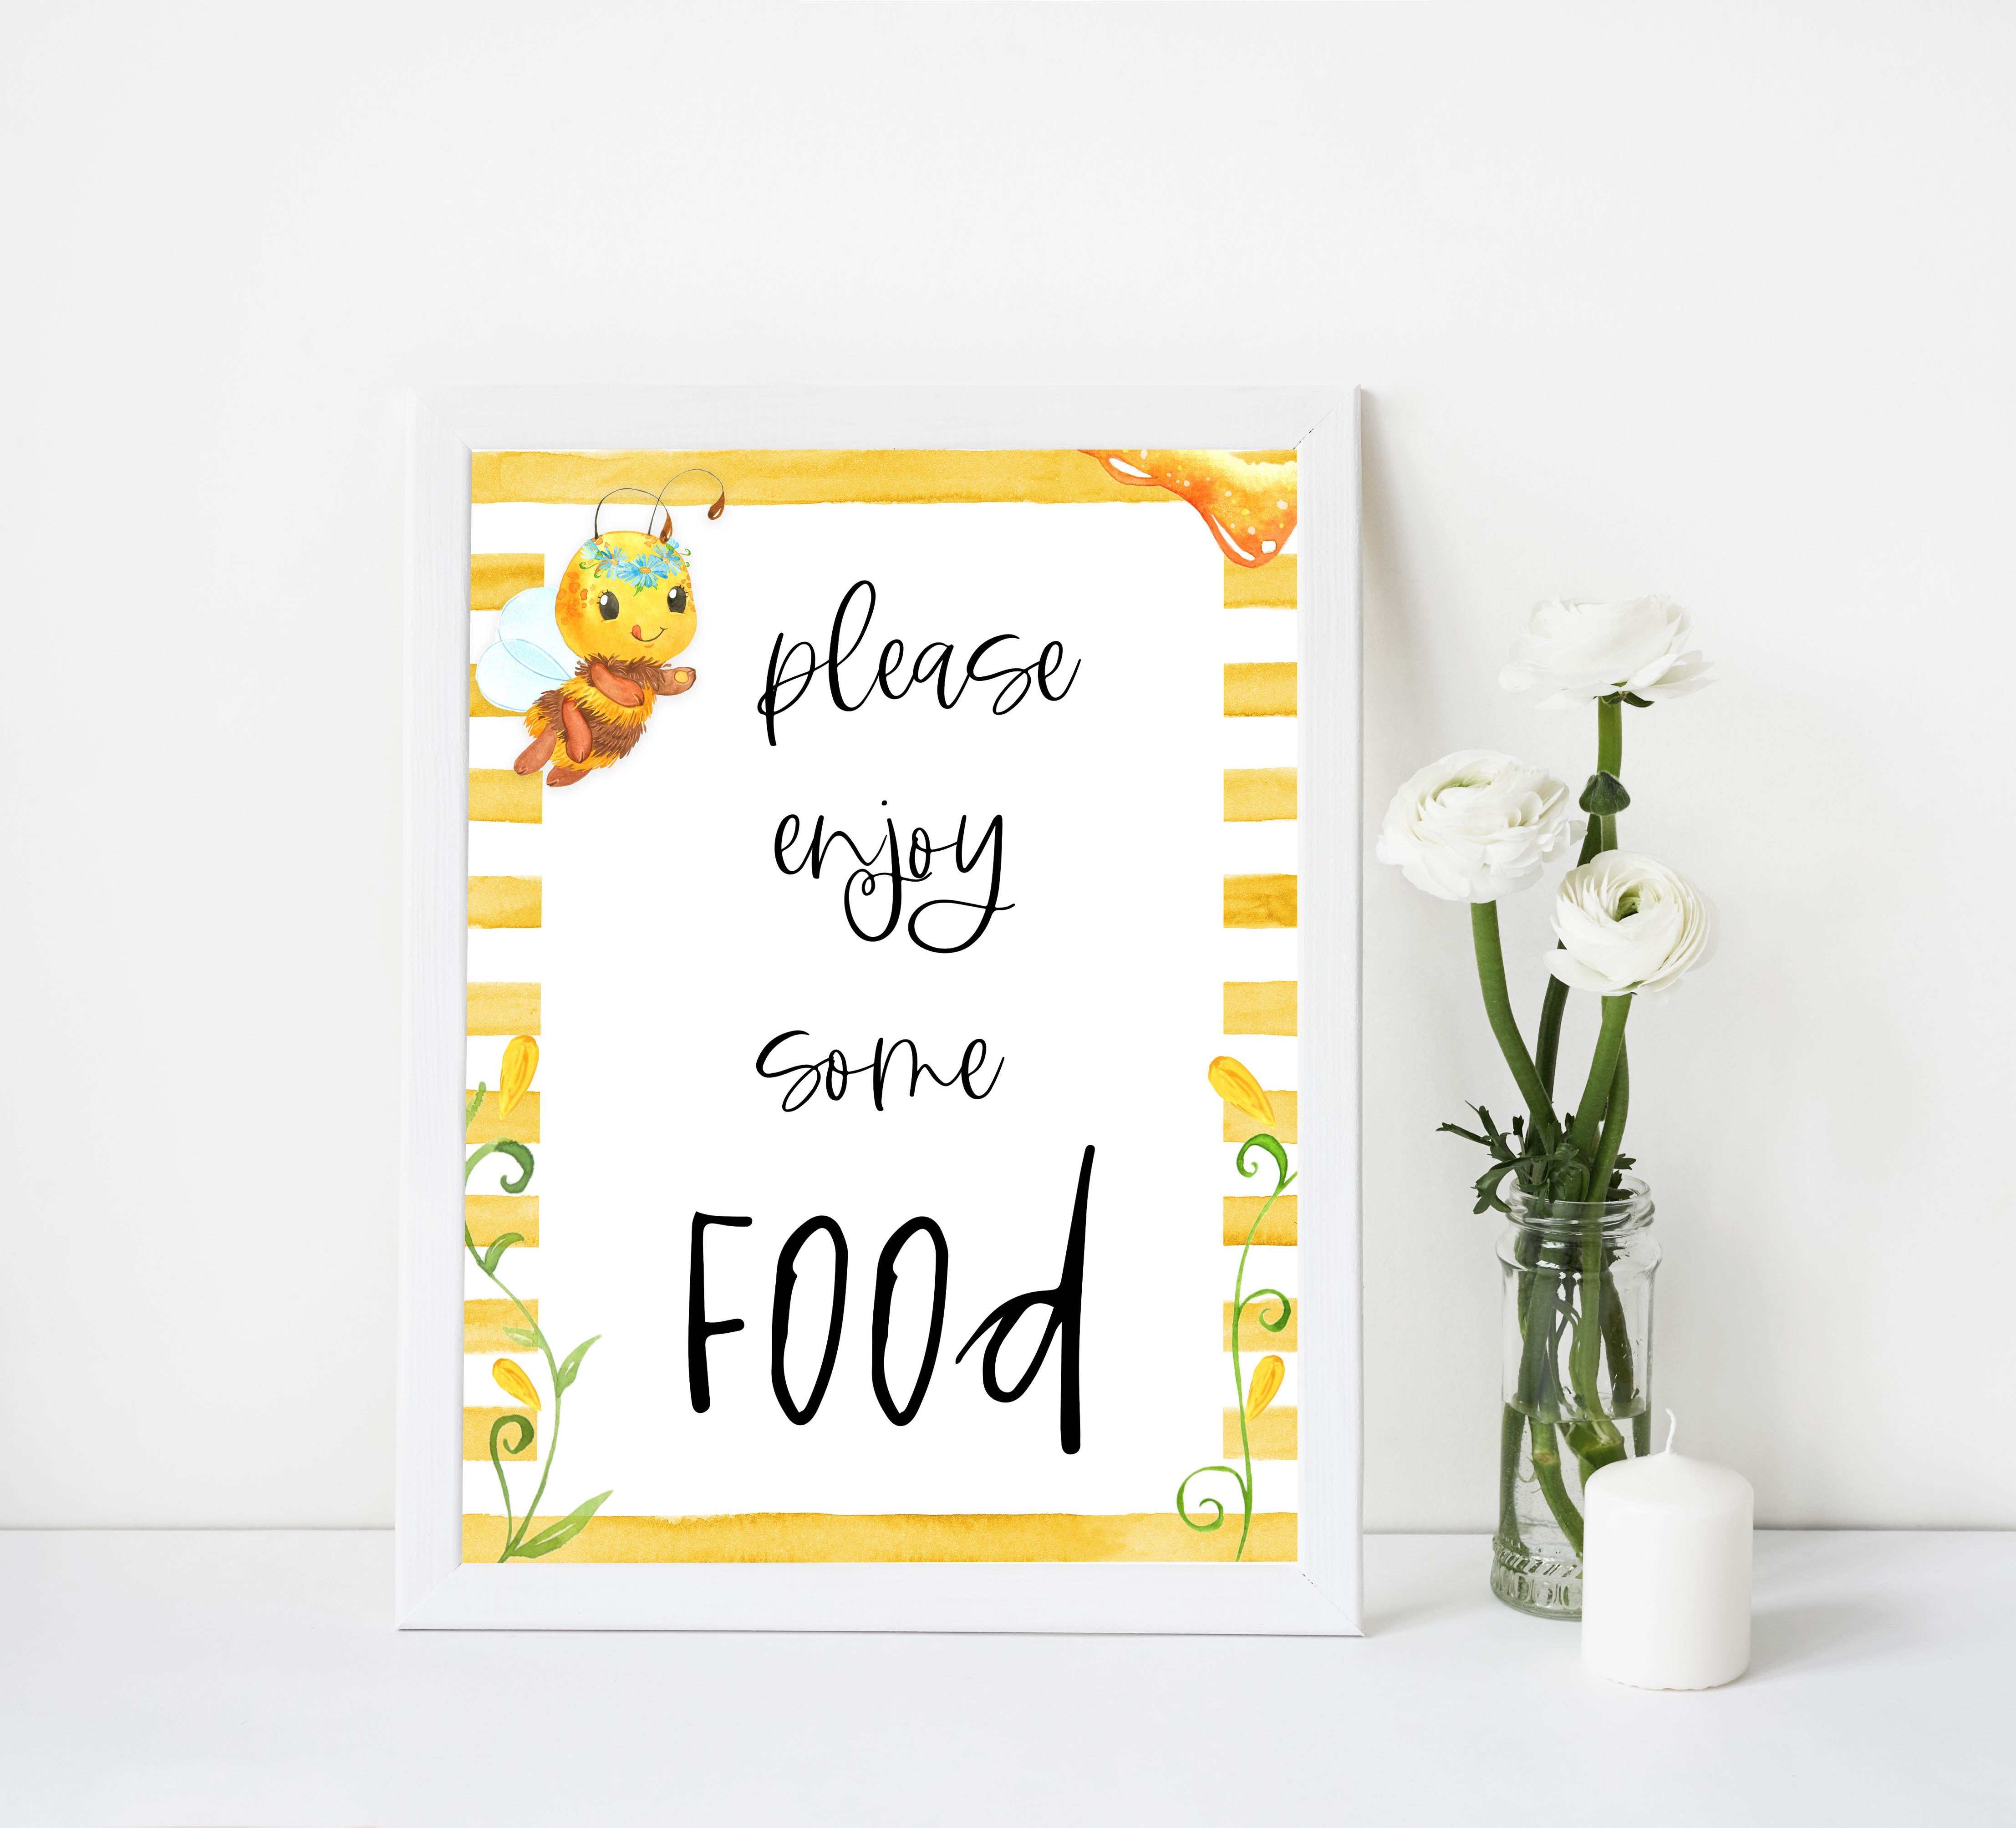 food baby table signs, food baby signs, Mommy to bee baby decor, printable baby table signs, printable baby decor, mommy bee table signs, fun baby signs, mummy bee fun baby table signs